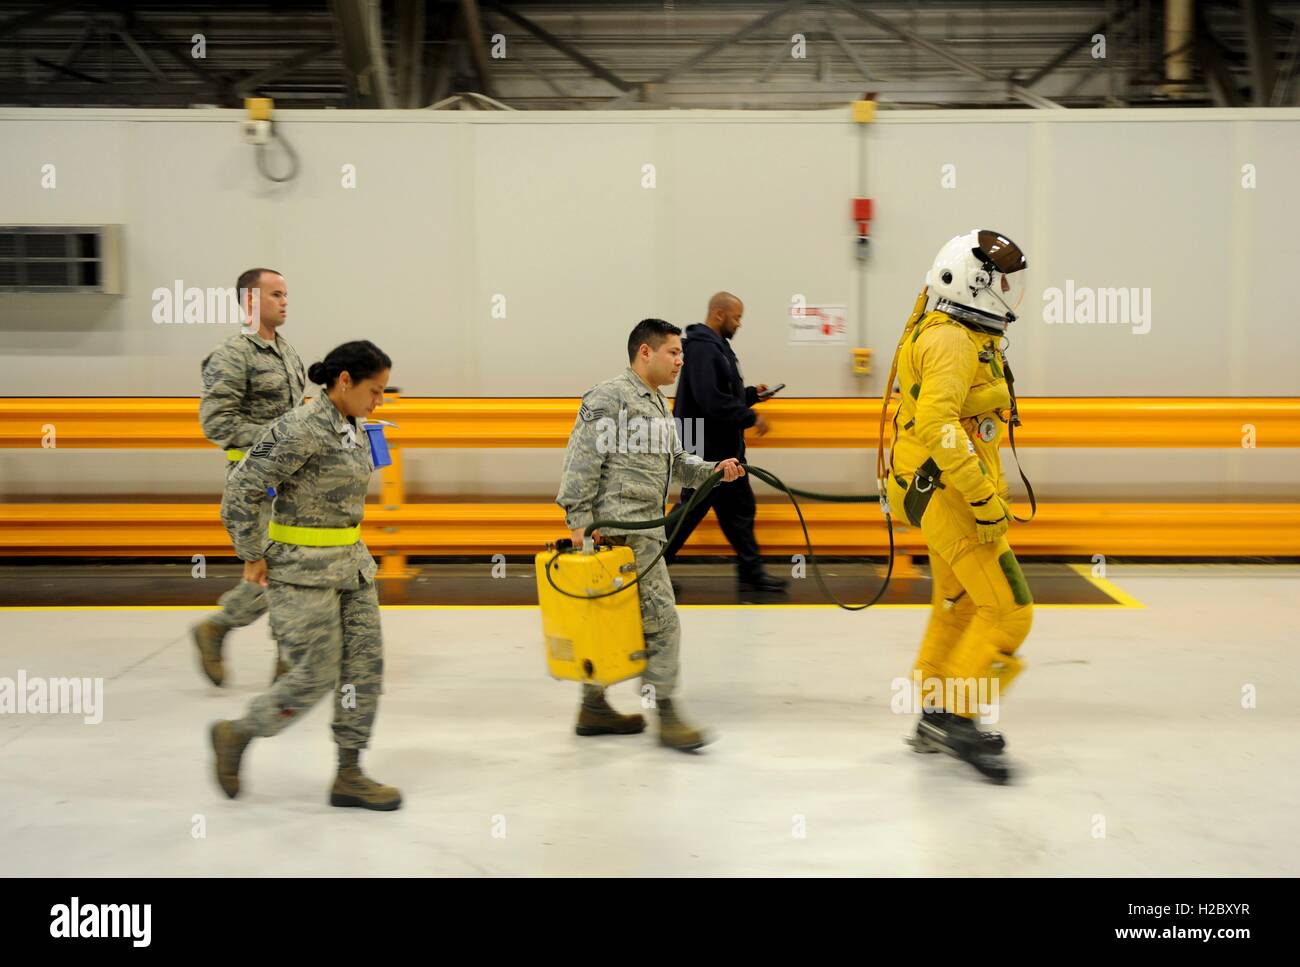 U.S. Air Force soldiers escort a pilot wearing a high-altitude pressure suit to his U-2 aircraft at Joint Base Andrews September 19, 2015 in Prince Georges County, Maryland. Stock Photo